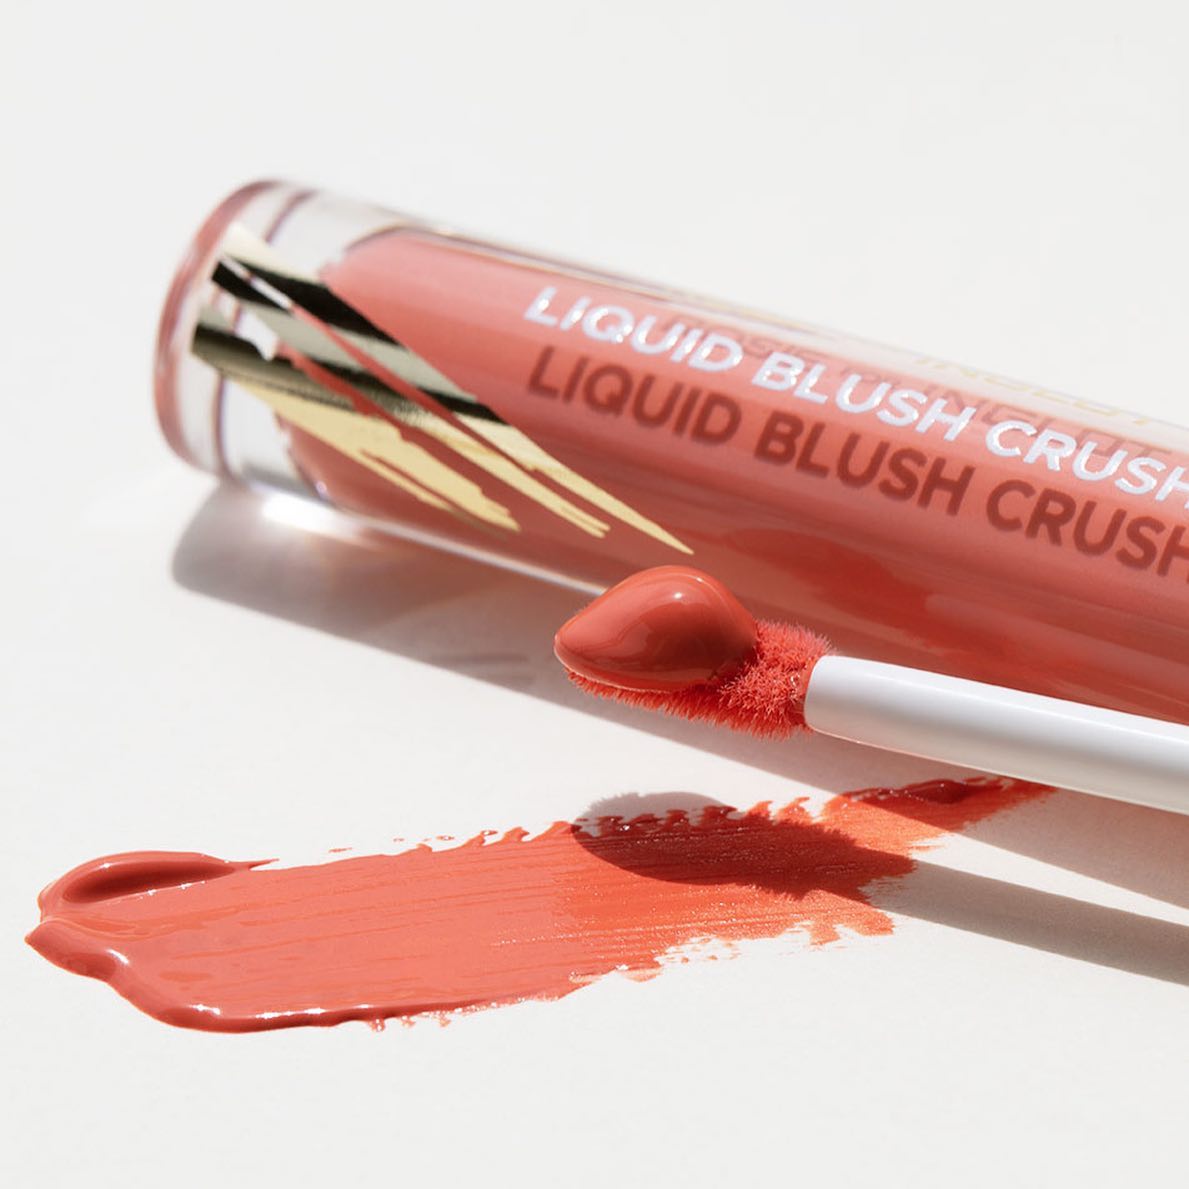 Rosie For Inglot Liquid Blush Crush - Give Us Beauty